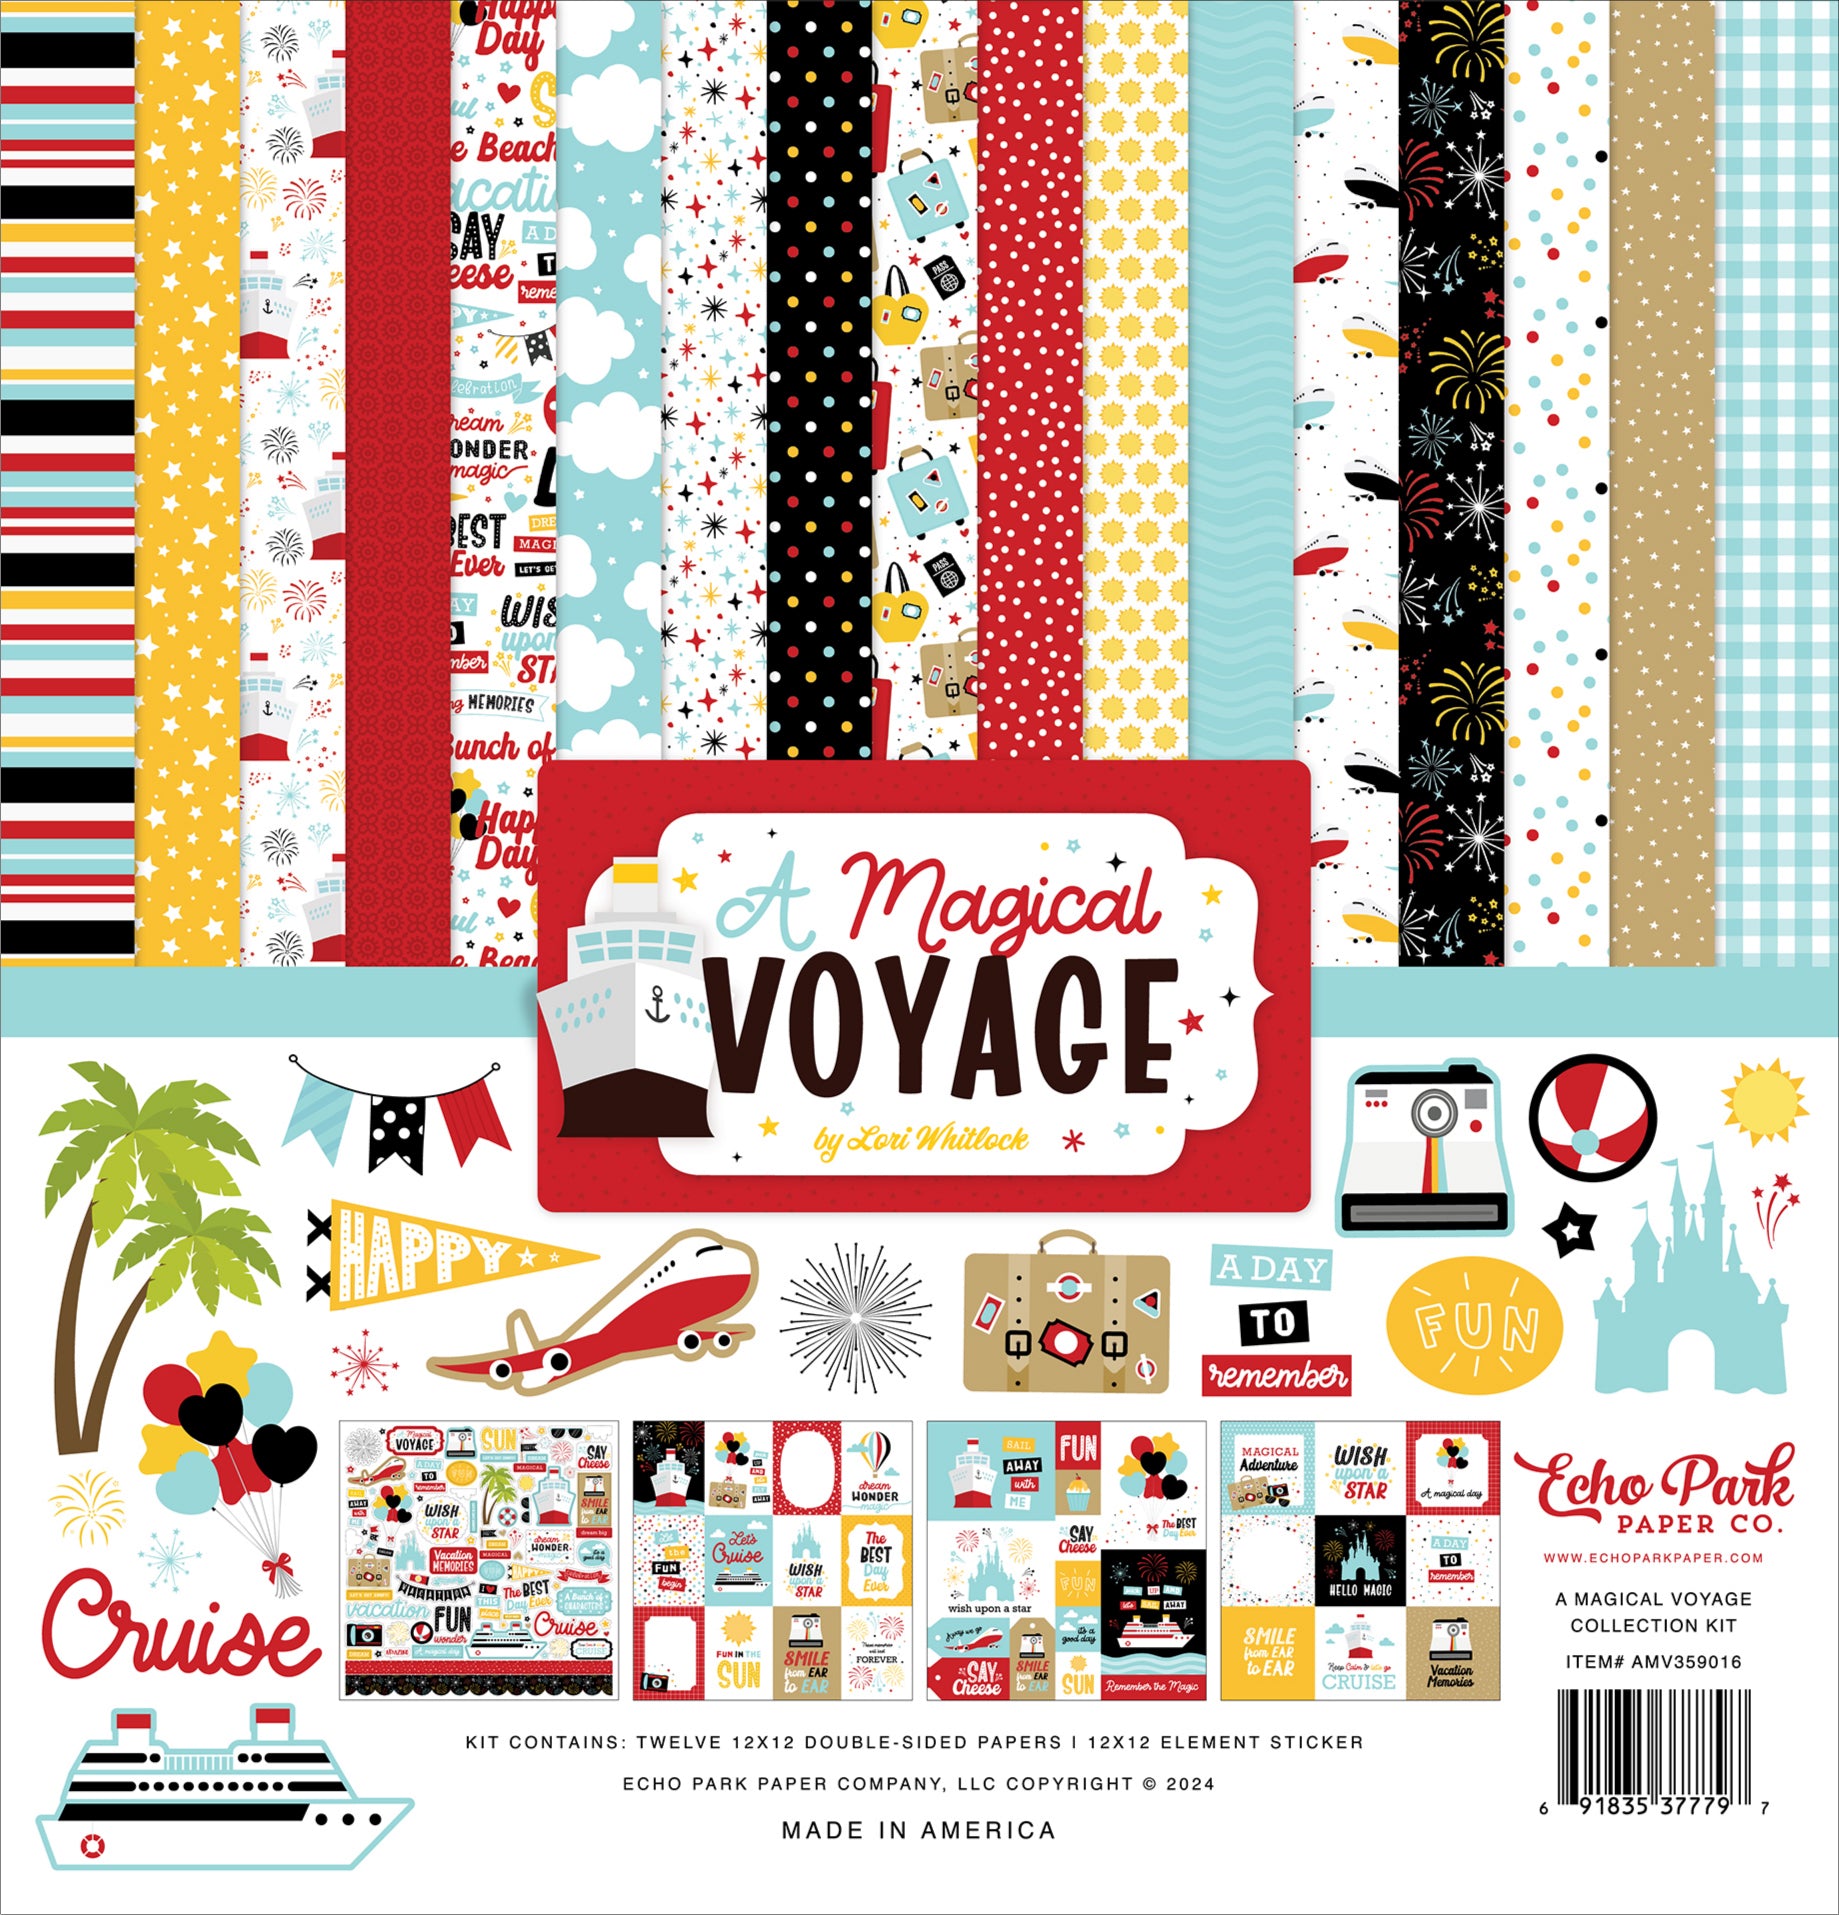 A Magical Voyage Collection 12 x 12 Scrapbook Collection Kit by Echo Park Paper